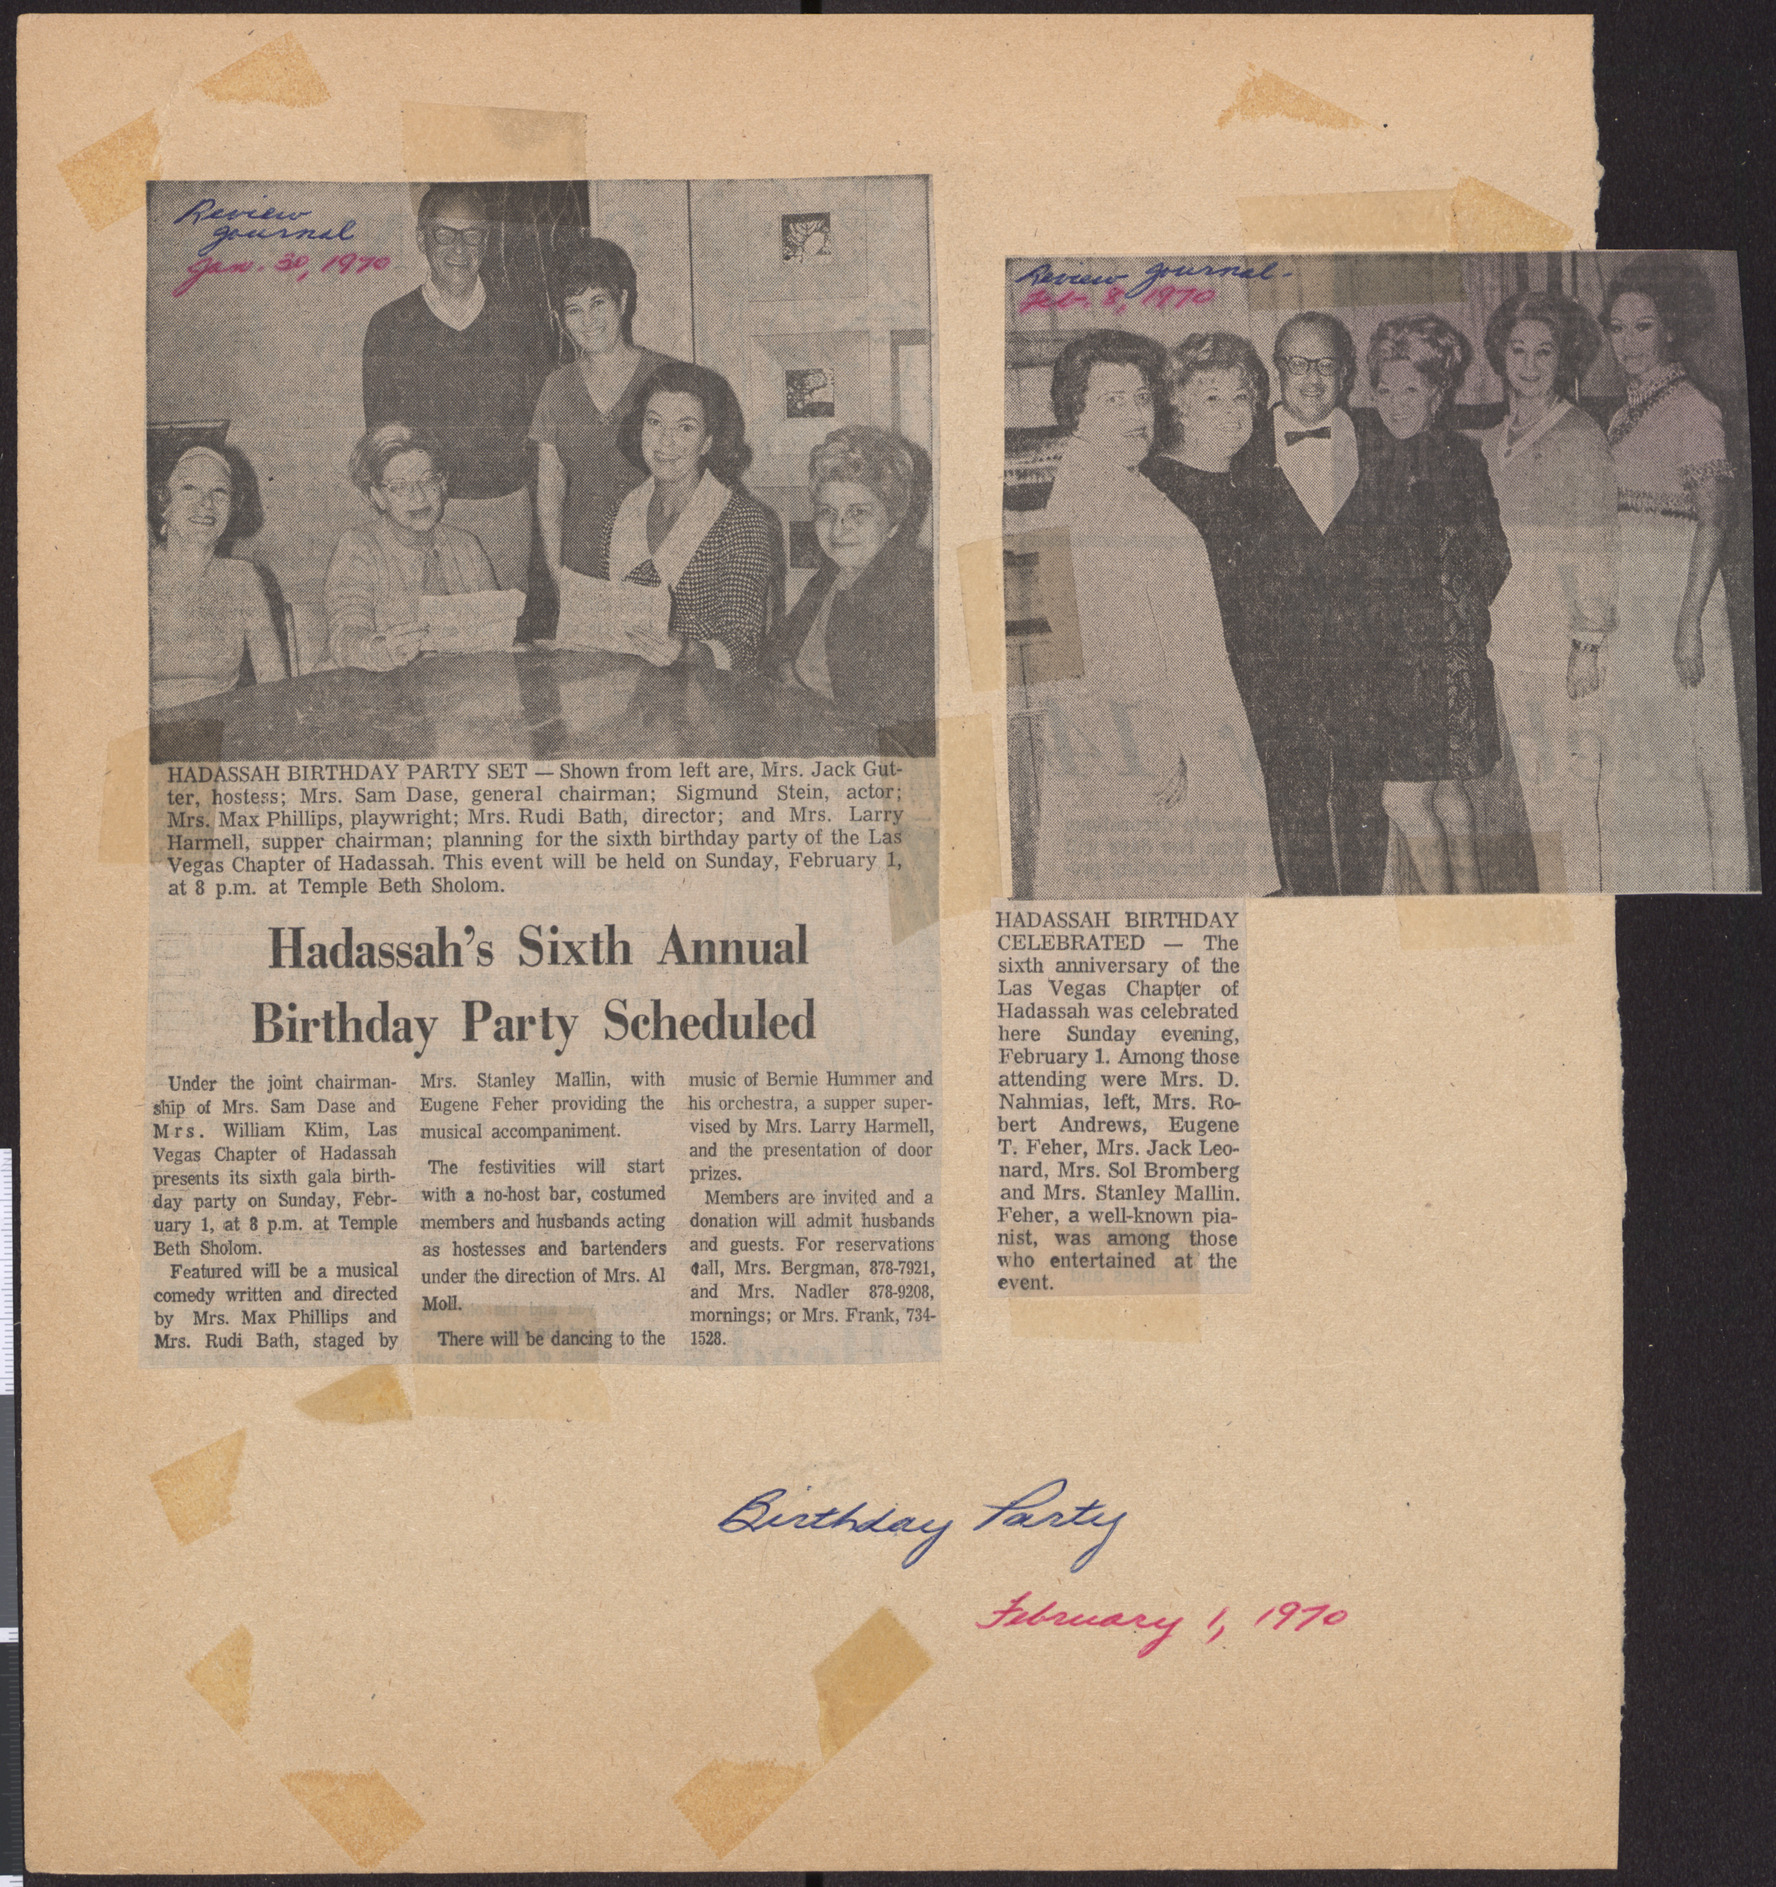 Newspaper clippings about Hadassah's sixth annual birthday party, January 1970